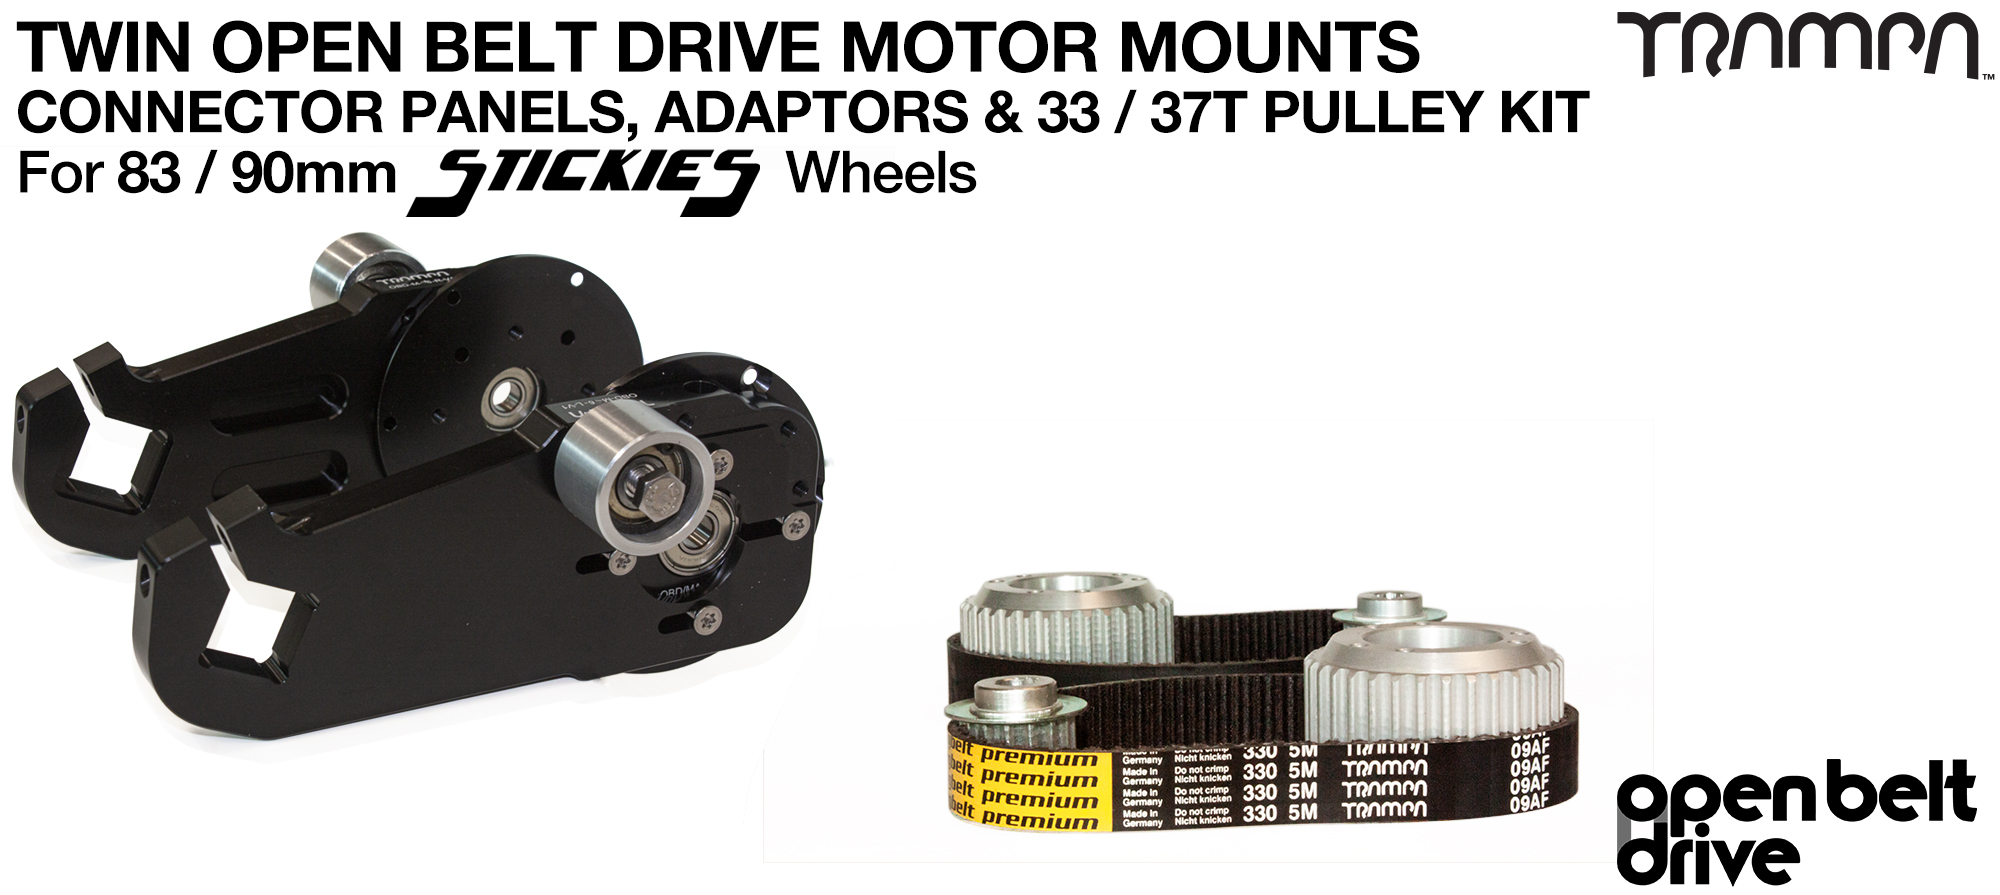 66T OBD Motor Mount & 33 / 37 tooth Pulley - TWIN